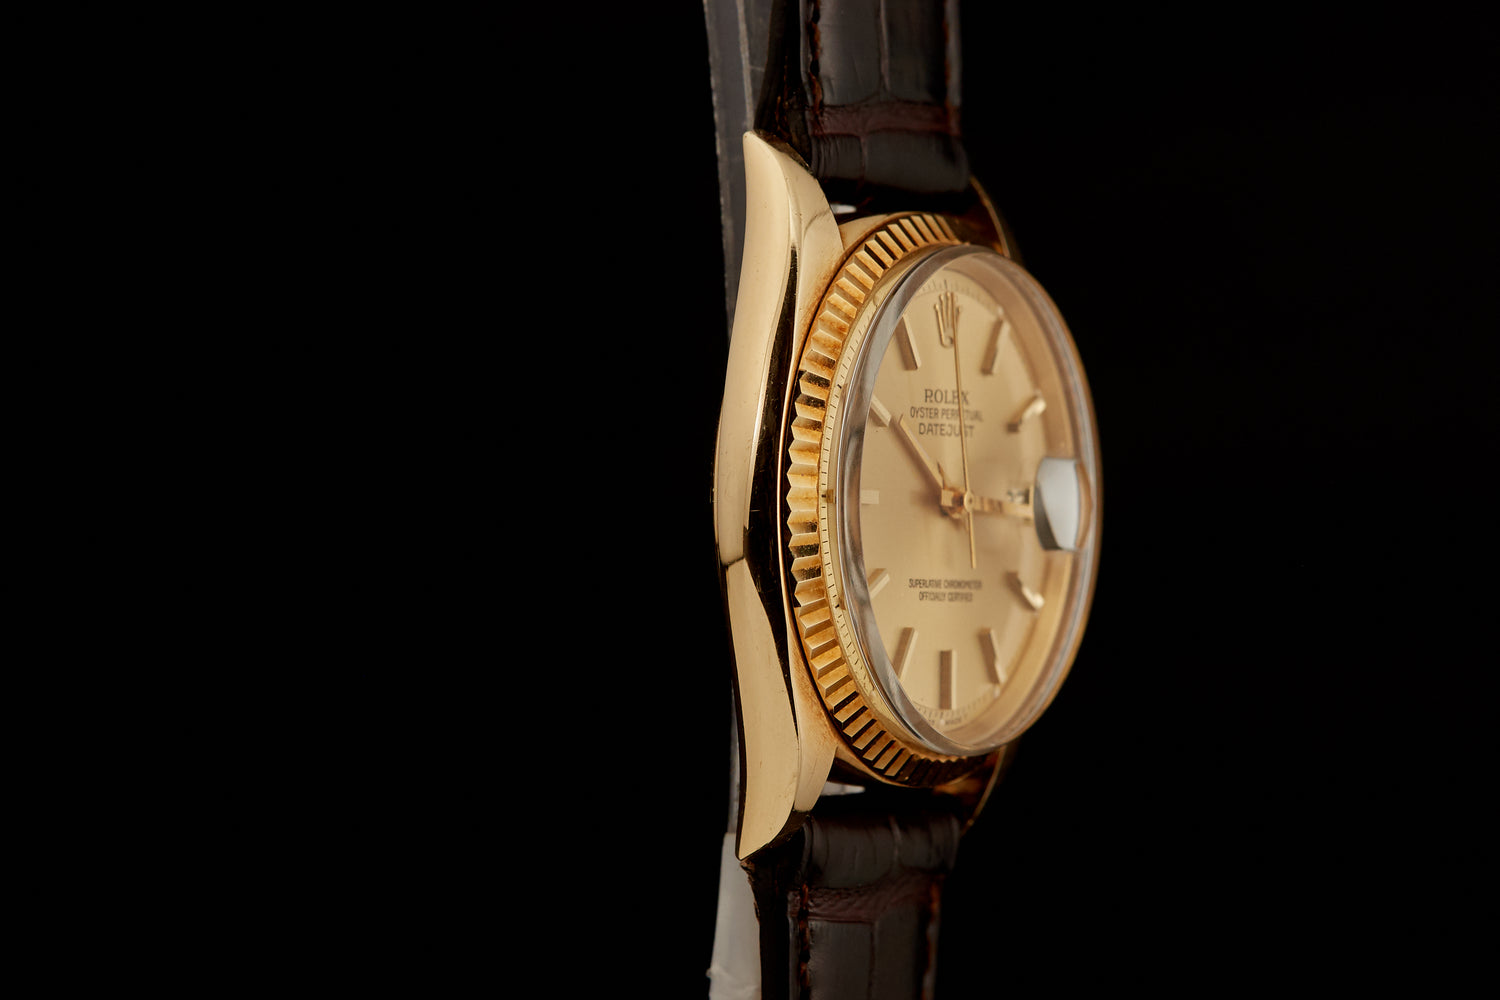 Rolex #1601 Datejust, Stainless Steel and 18K Gold, on Leather Strap